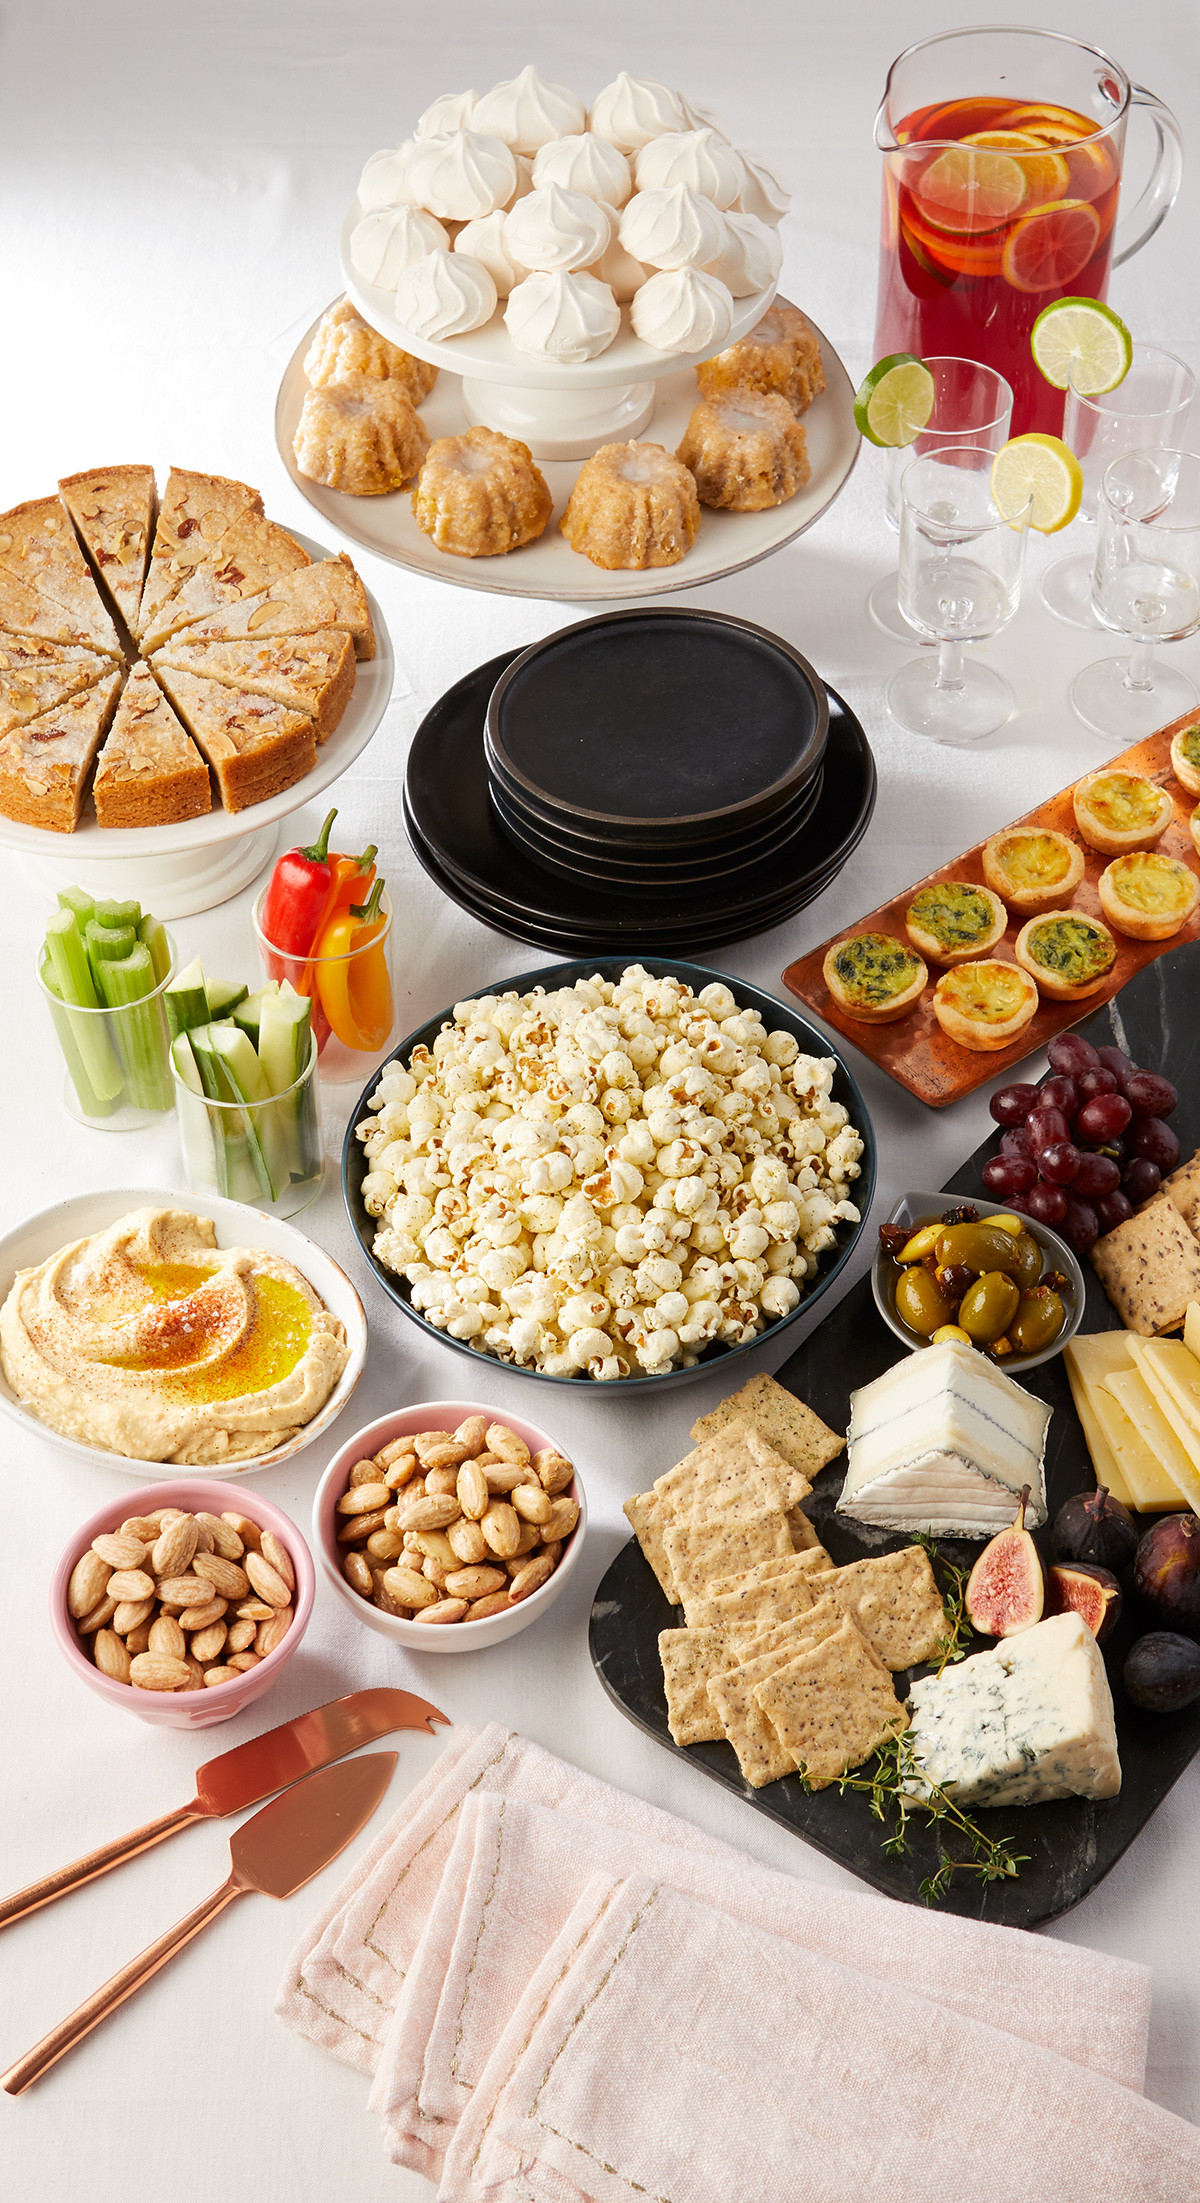 Party Food Table Ideas
 Host an Appetizers ly Dinner Party Finger Food Ideas